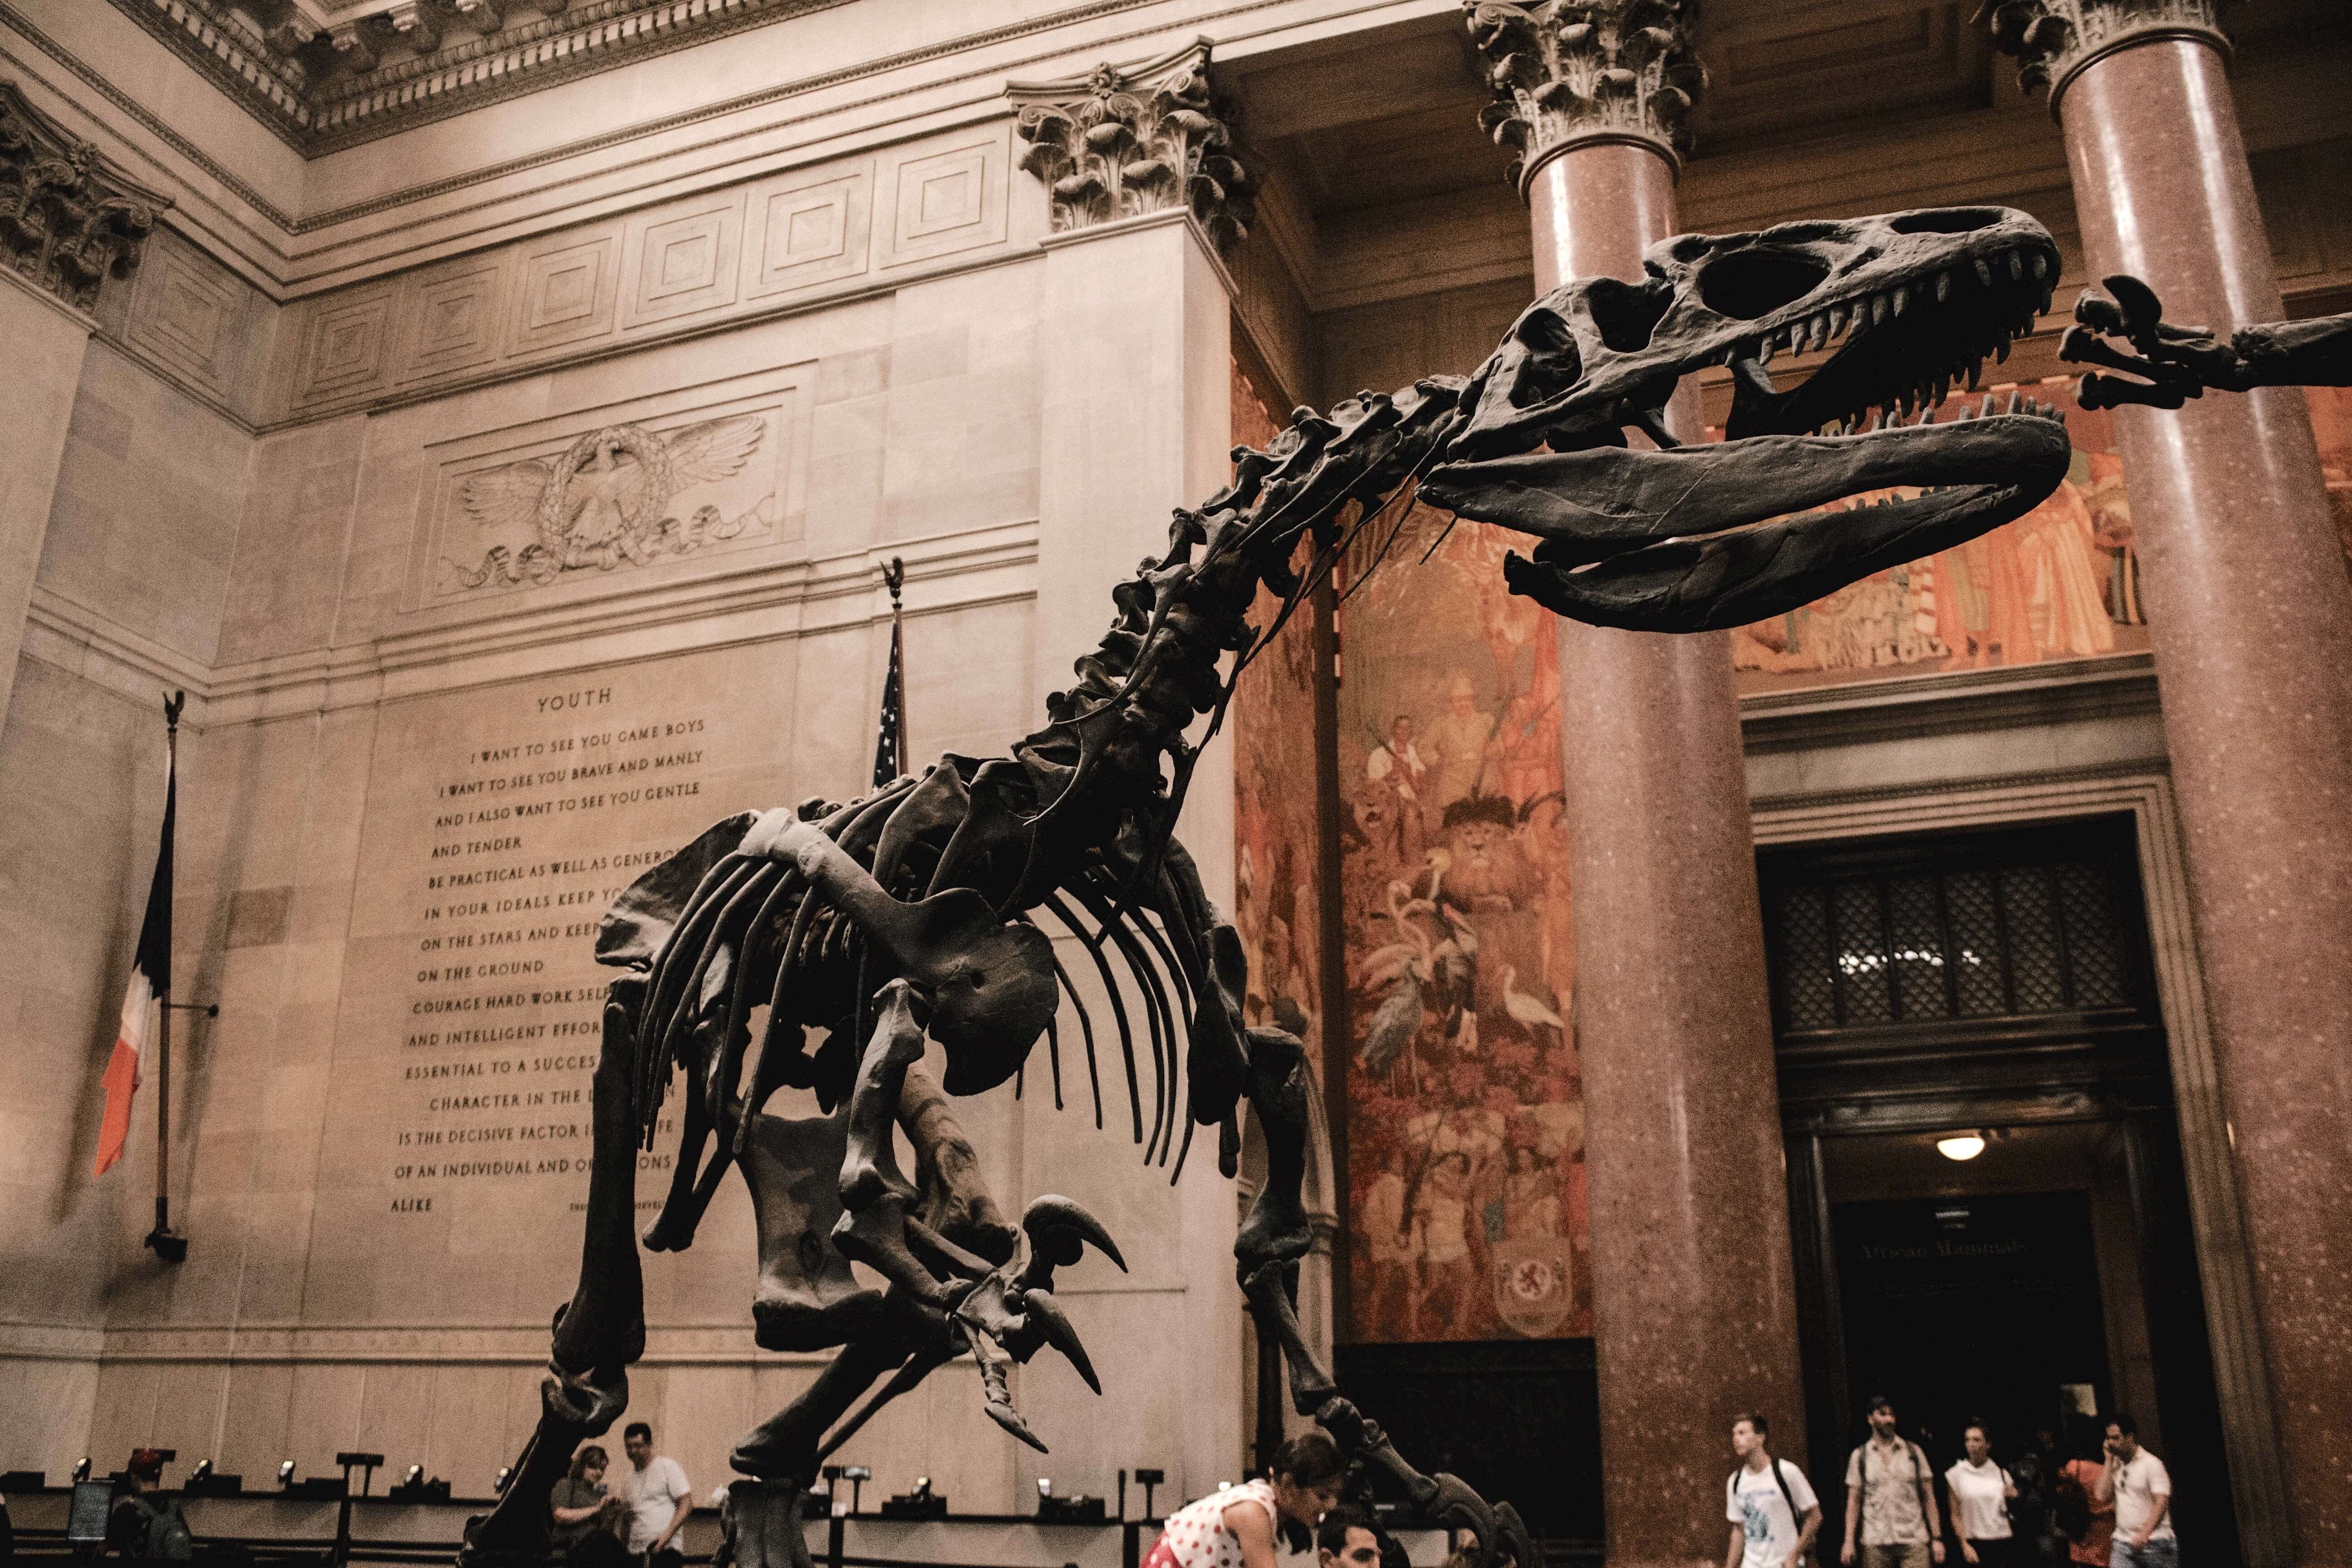 The American Museum of Natural History, one of several museums available through Culture Pass